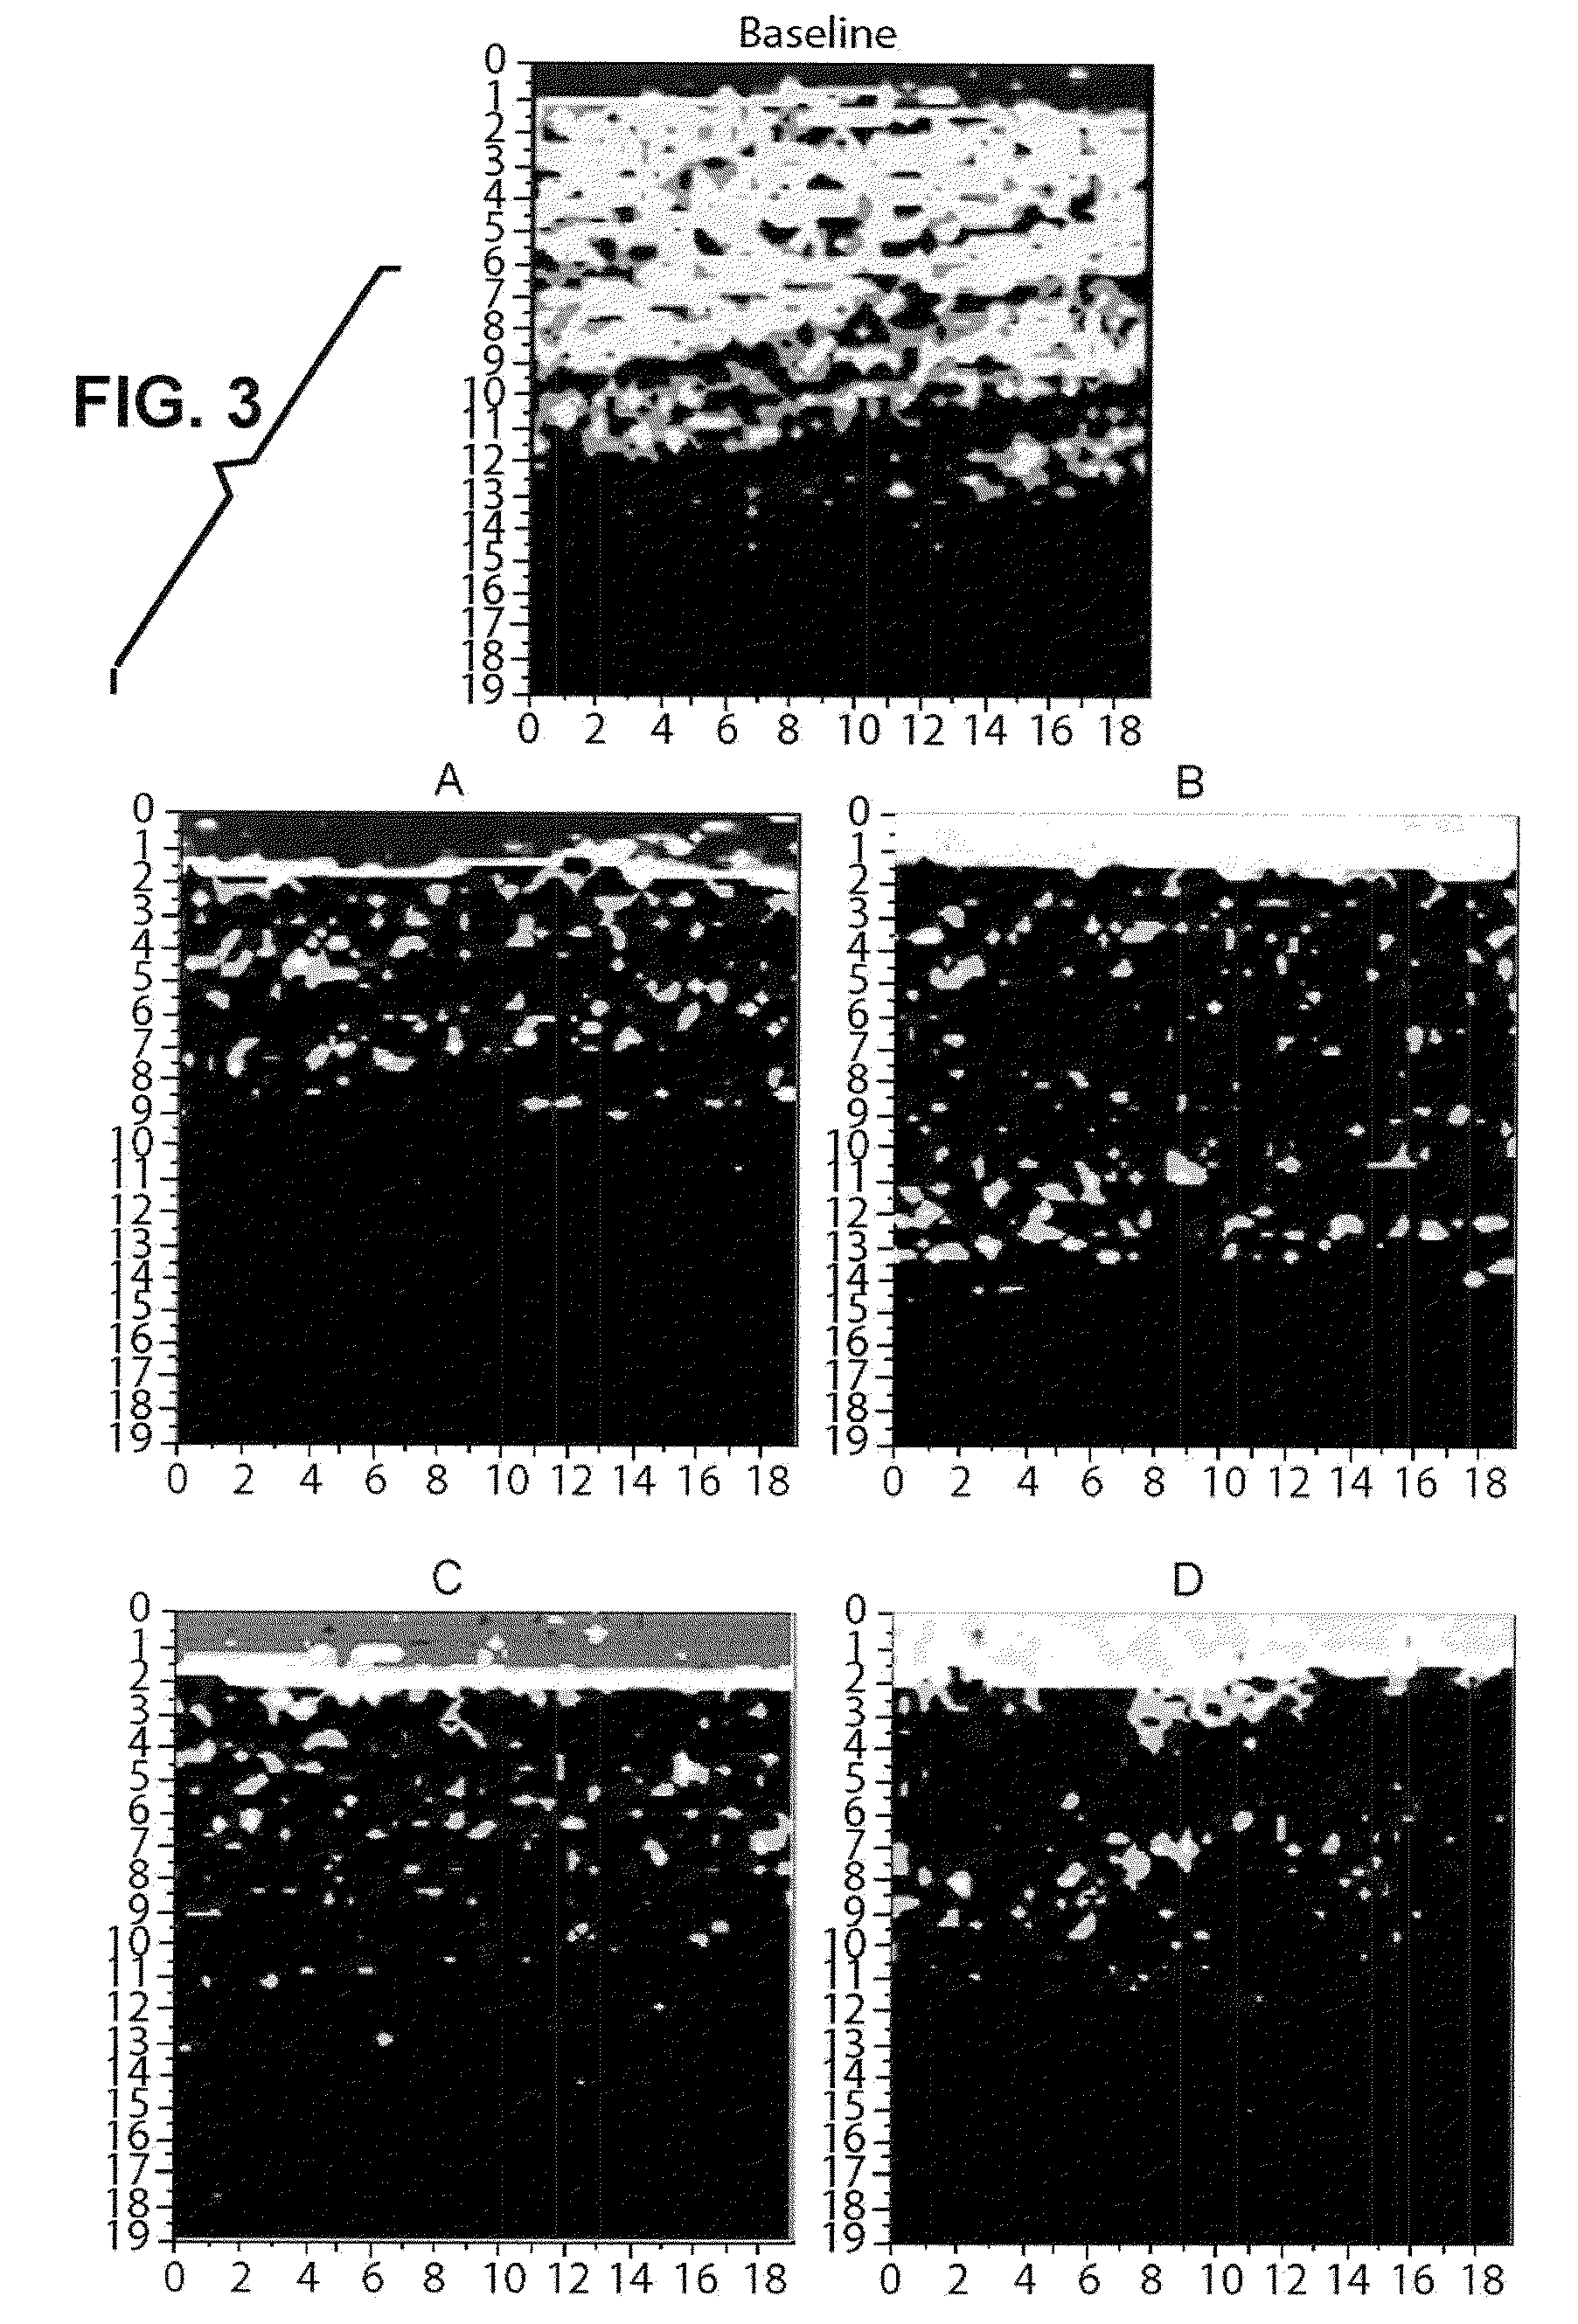 Treated refractory material and methods of making